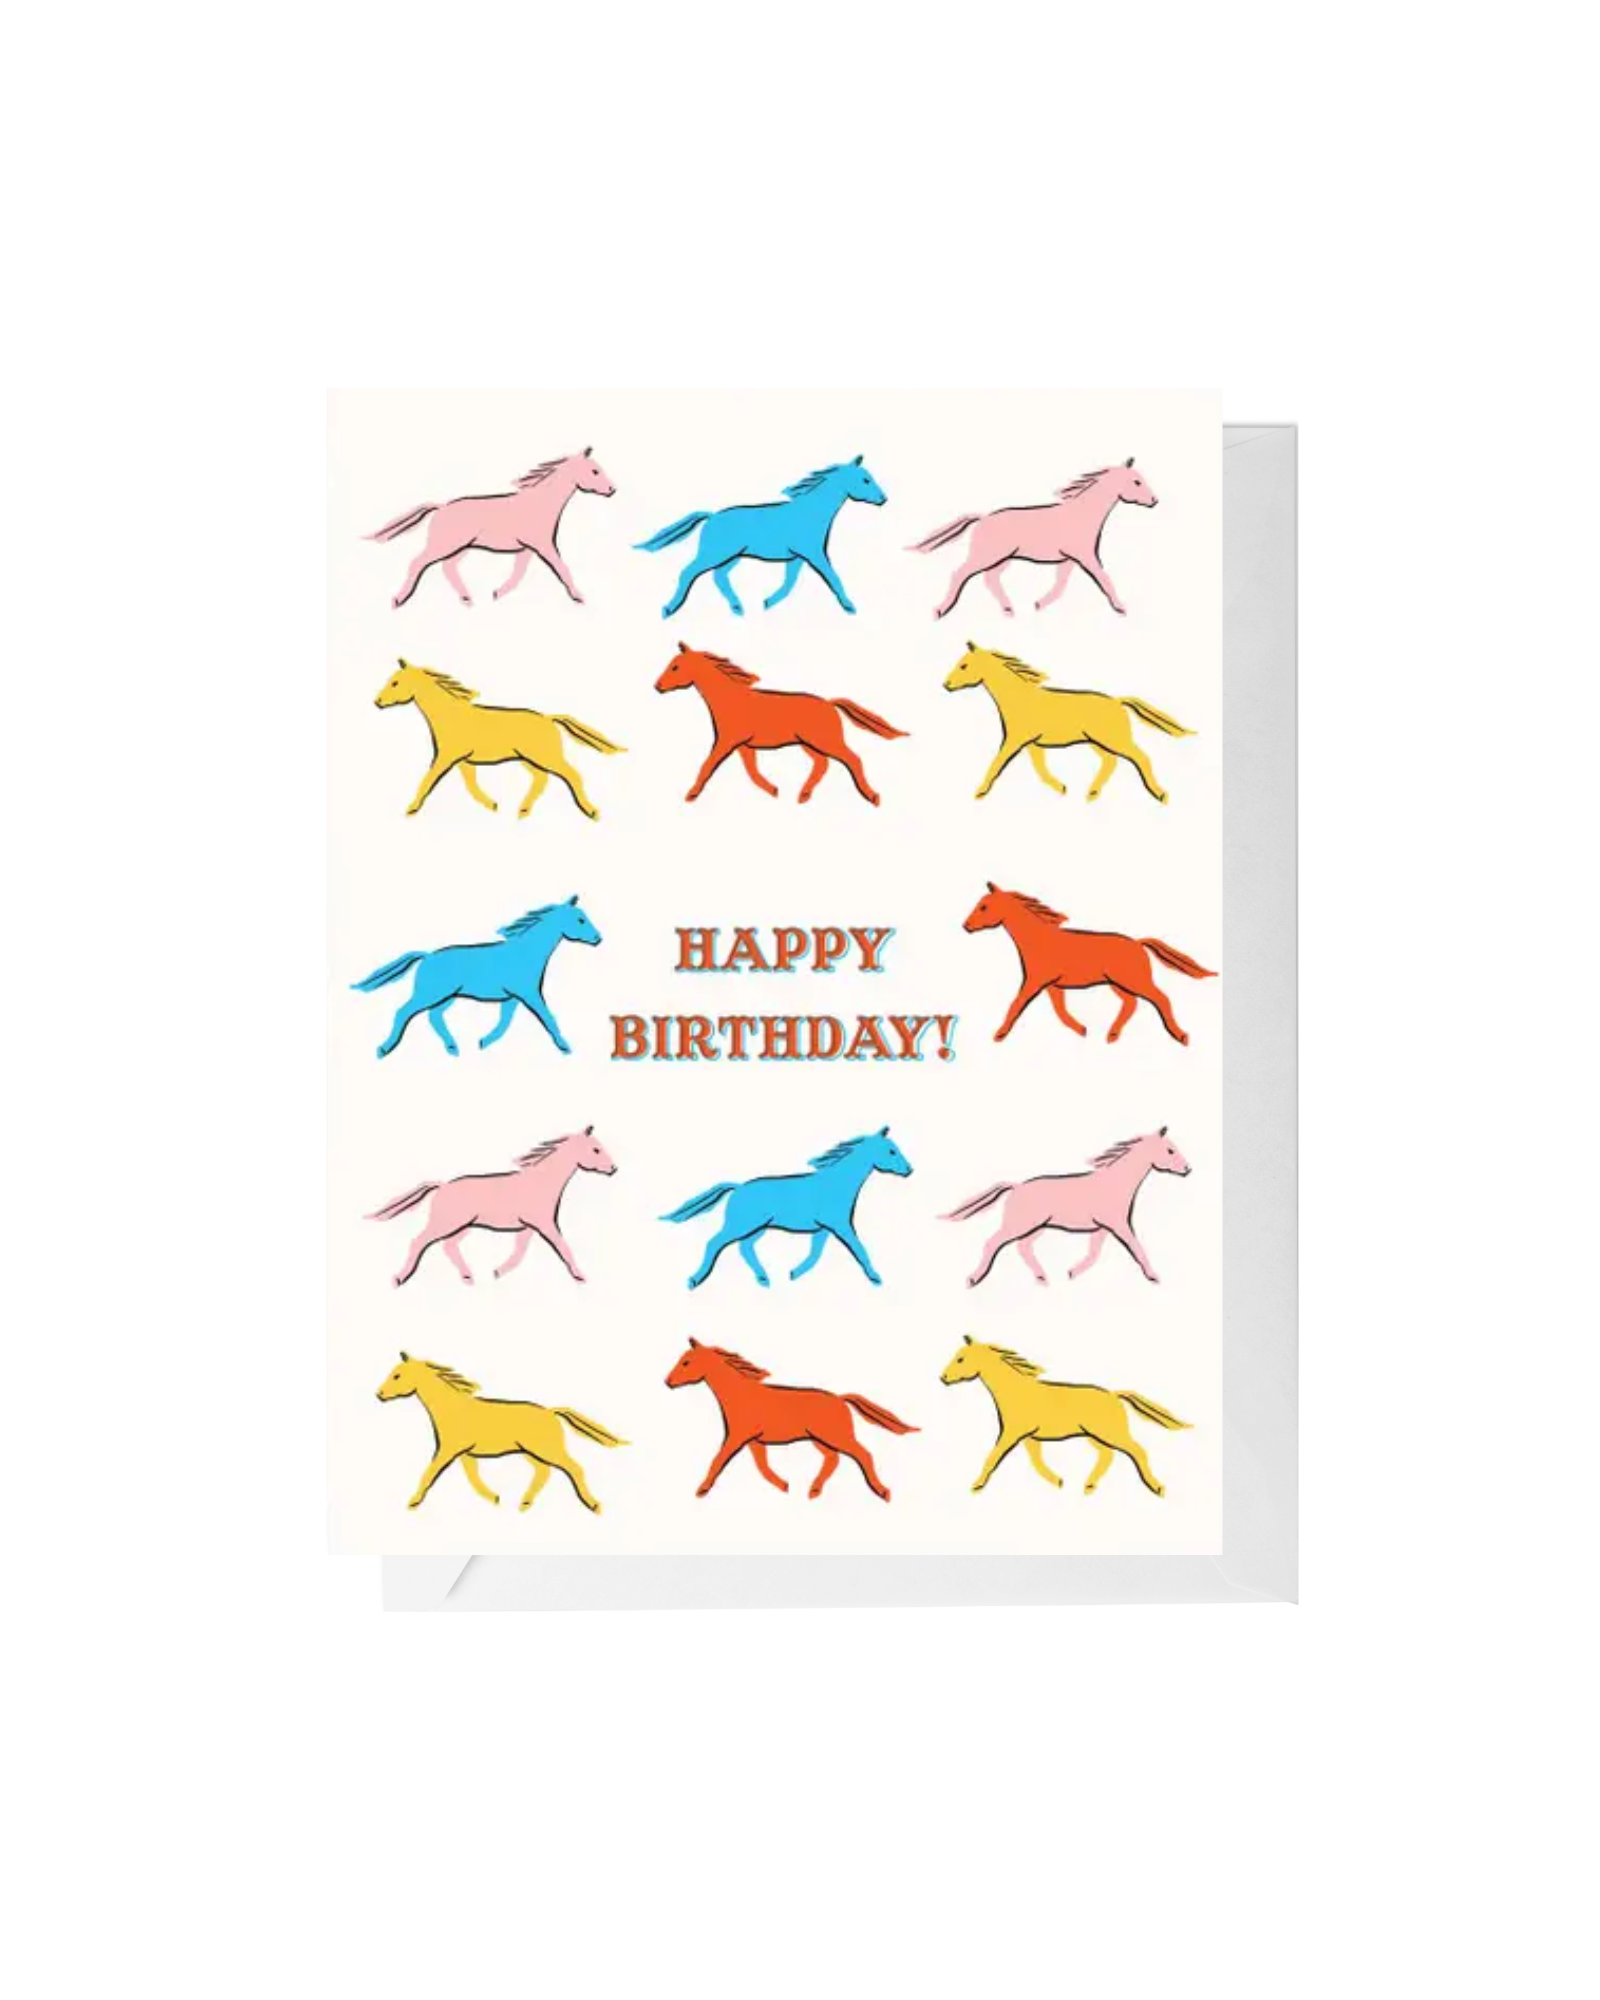 White greeting card with horse illustrations in pink, blue, red, and yellow with the words "happy birthday" in red capital letters 